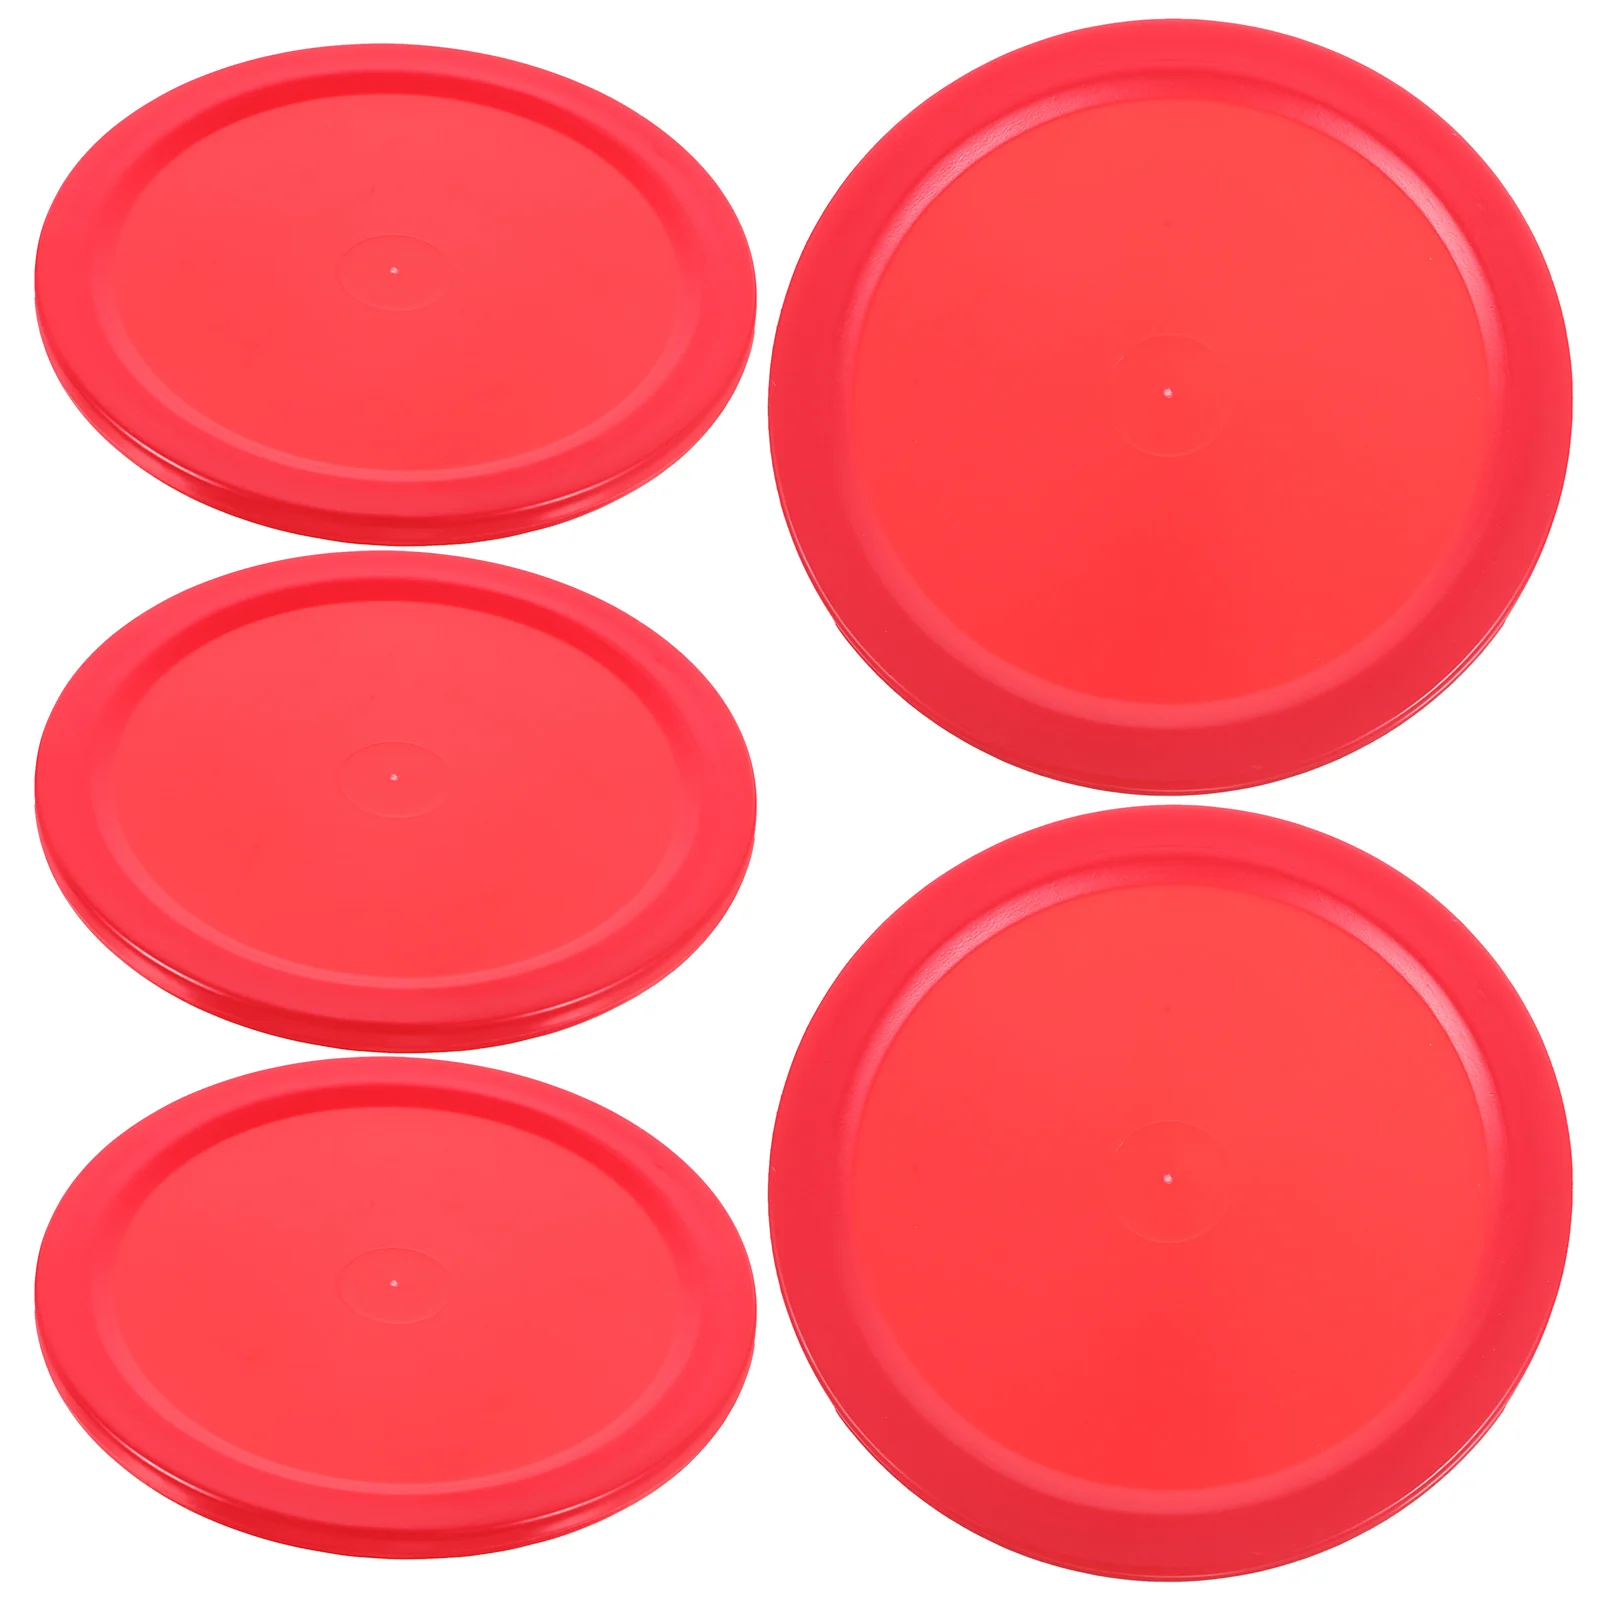 5 Pcs Air Hockey Games Supplies Indoor Pucks Replacement Round Mini Accessories Ice air hockey parts game accessories component toys table supplies abs pushers pucks